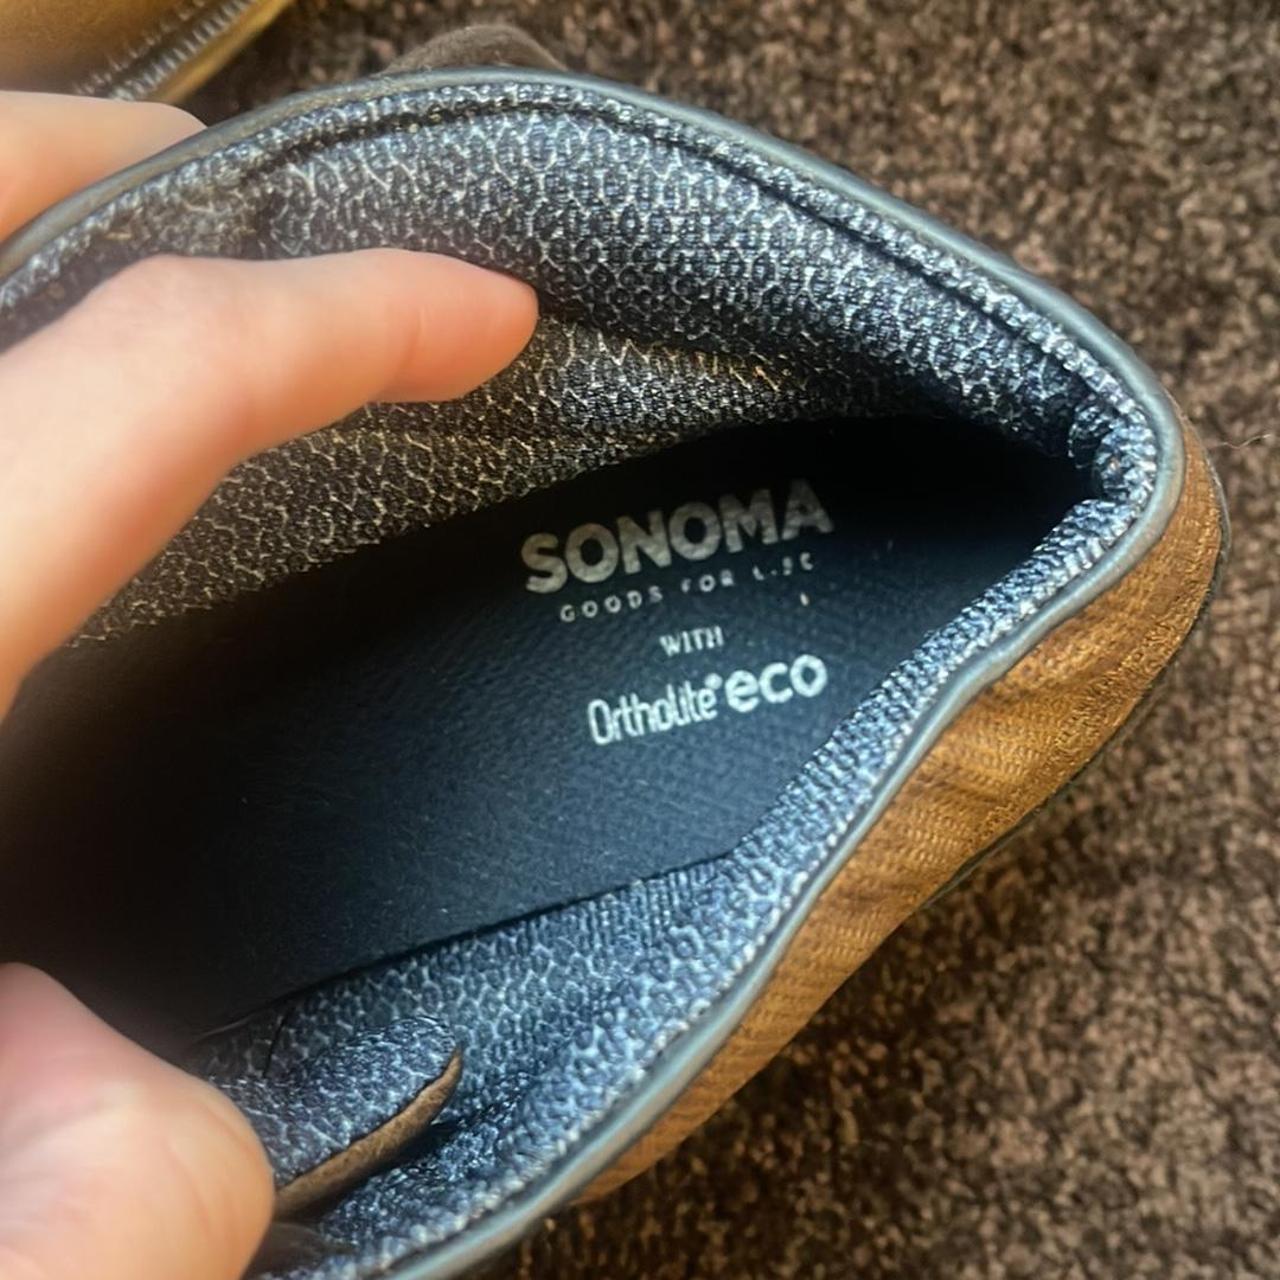 Mens Shoes Sonoma Goods For Life With Ortholite Eco 